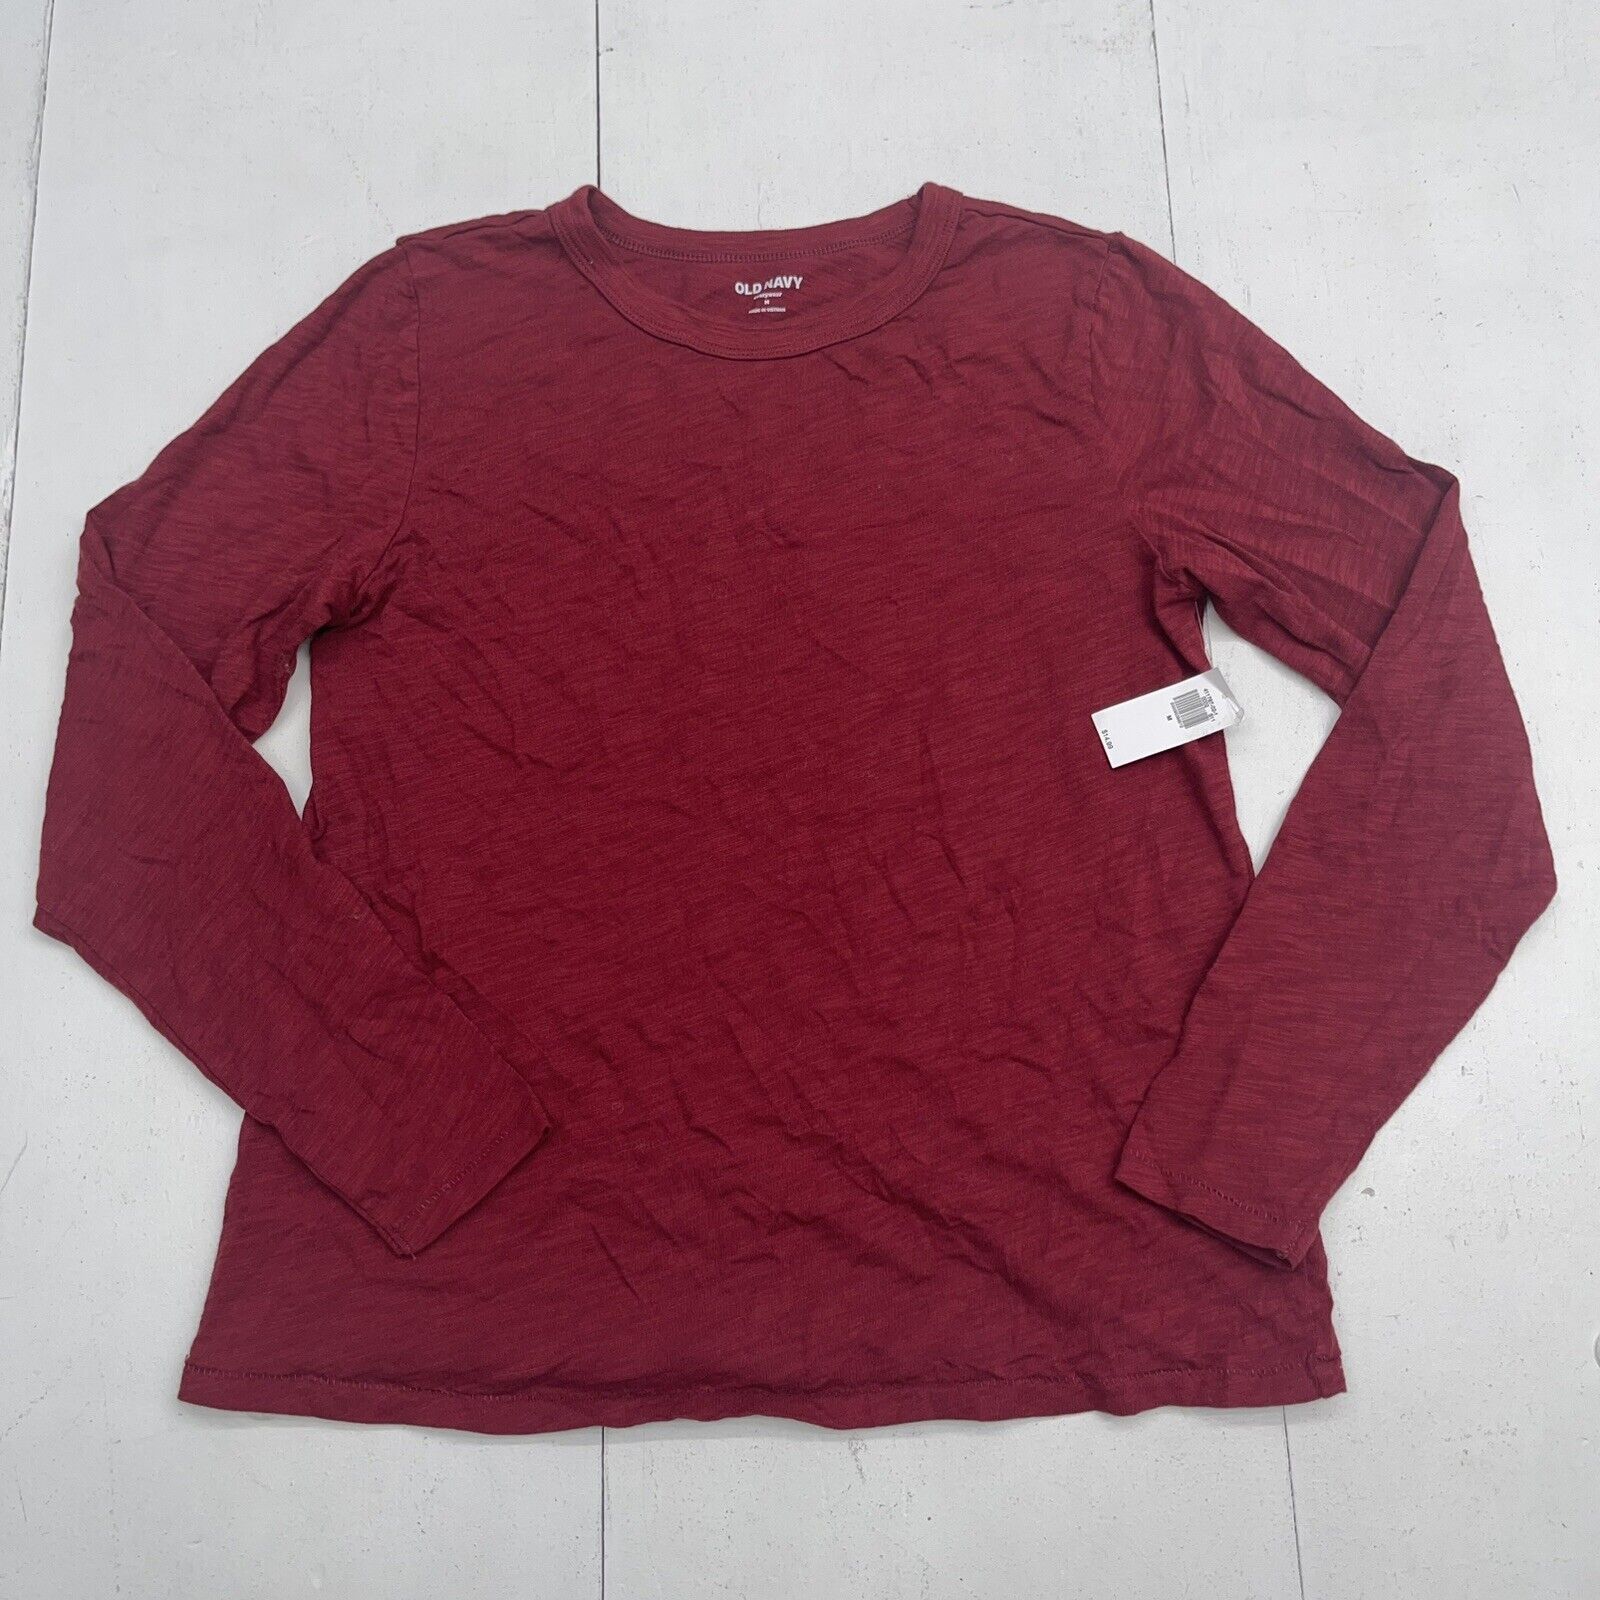 Old Navy Red Everywhere Long Sleeve T Shirt Women’s Size Medium New